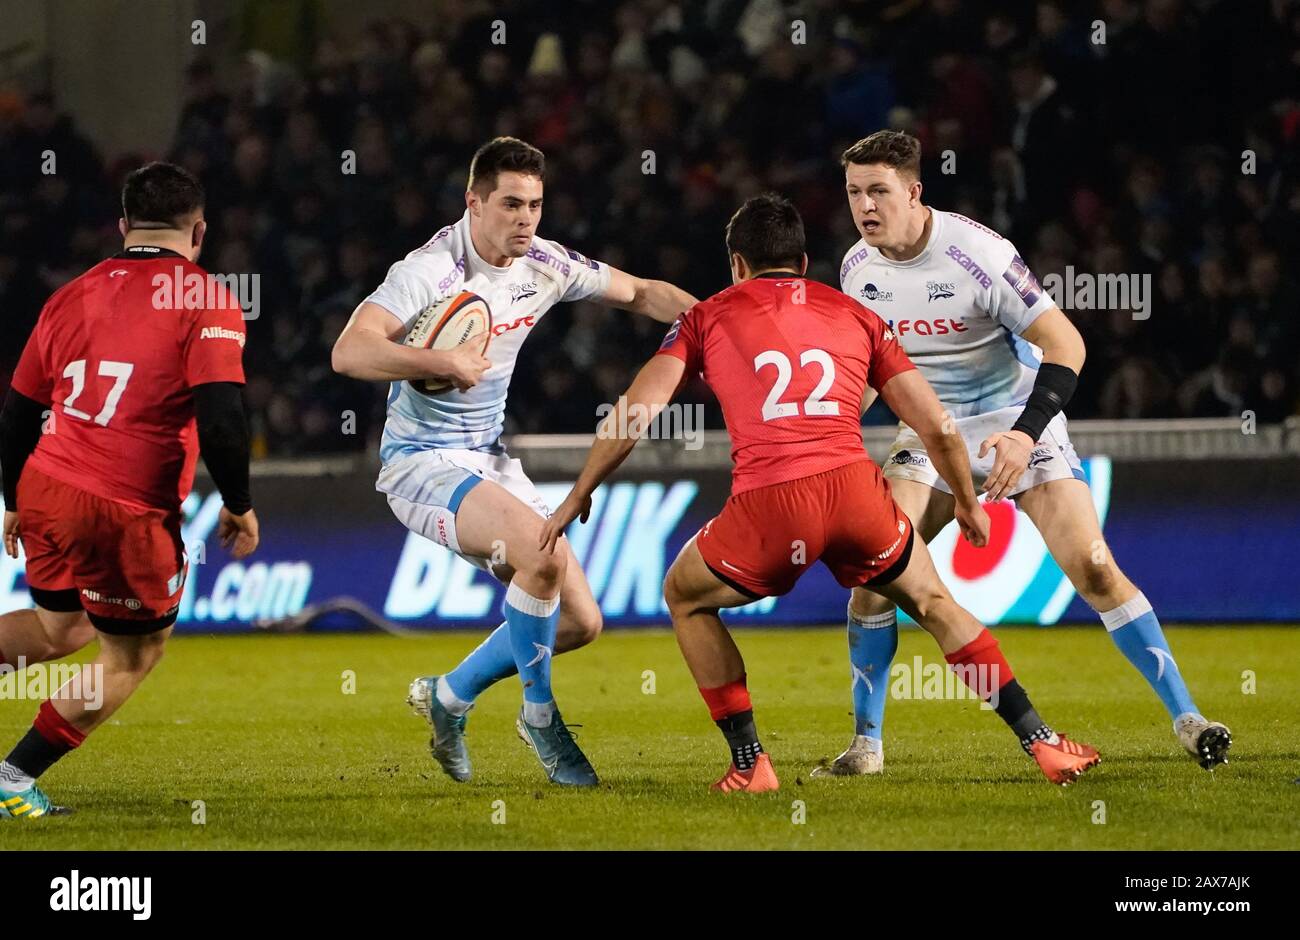 Sale Sharks Luke James runs at  Saracens Alex Lozowski during a Premiership Rugby Cup Semi Final  won by Sale 28-7, Friday, Feb. 7, 2020, in Eccles, United Kingdom. (Photo by IOS/ESPA-Images) Stock Photo